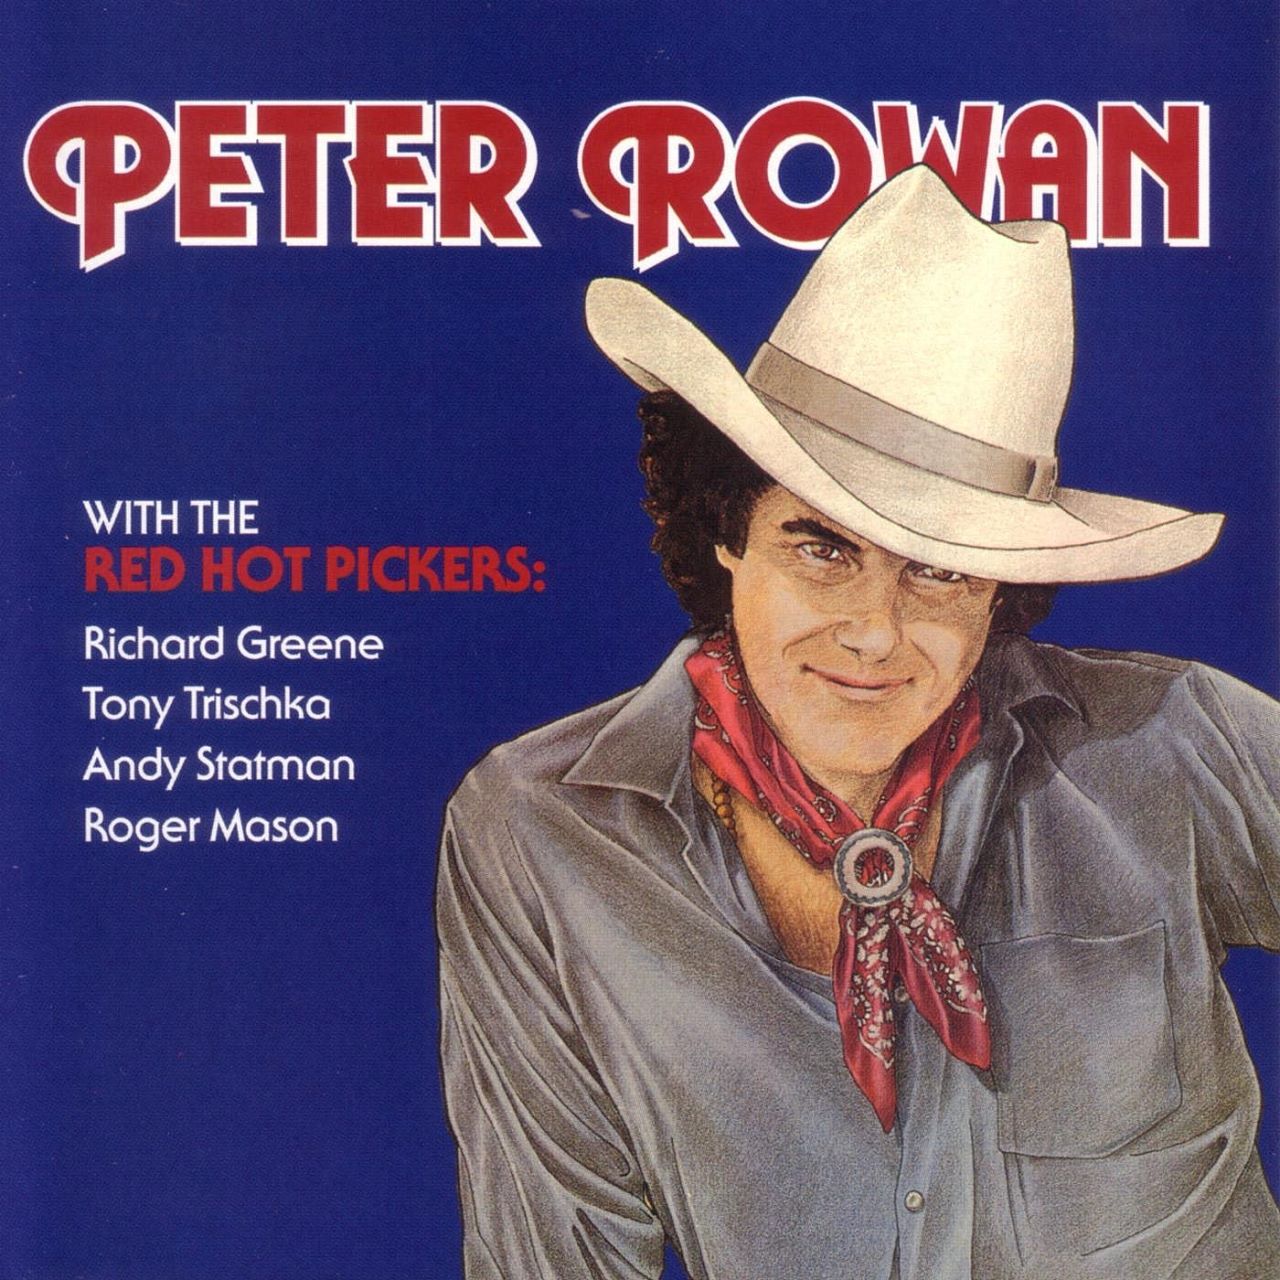 Peter Rowan - Peter Rowan With The Red Hot Pickers cover album